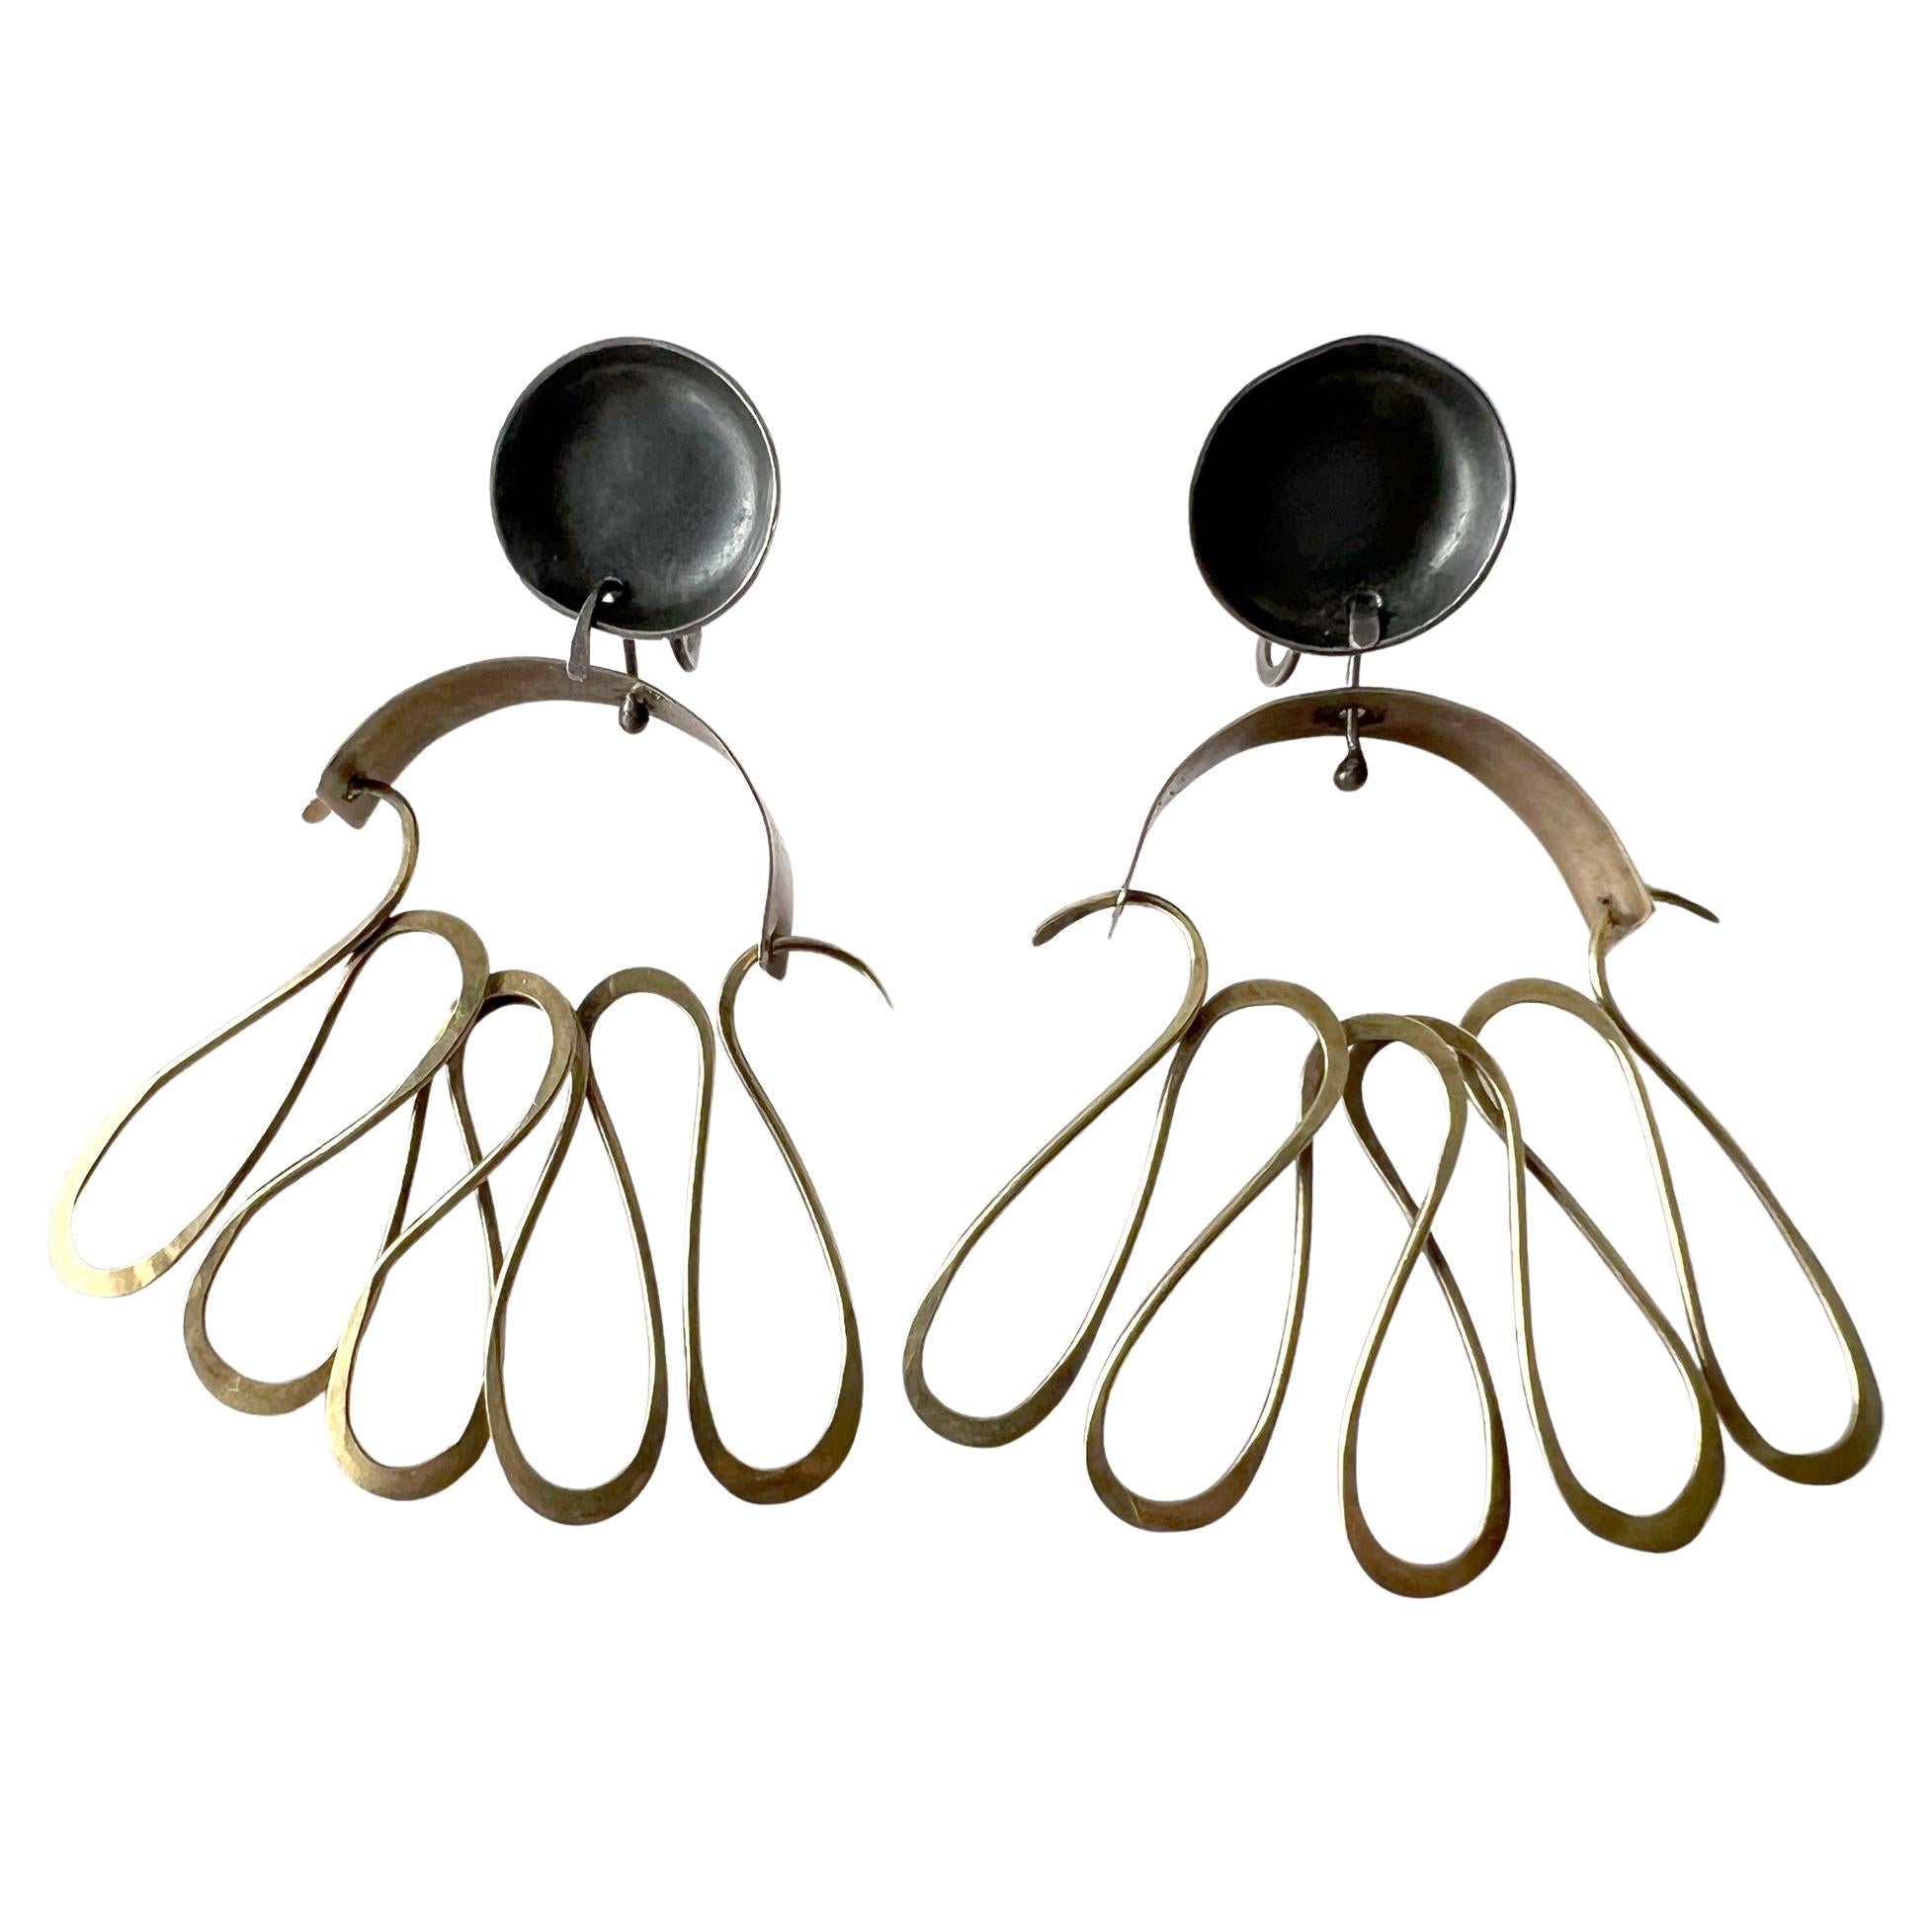 Rare screw back earrings created by modernist jeweler Carolyn Pence, circa 1950s.  Earrings are completely handcrafted 14K gold and with sterling silver findings that are in working order. They measure 2 3/8